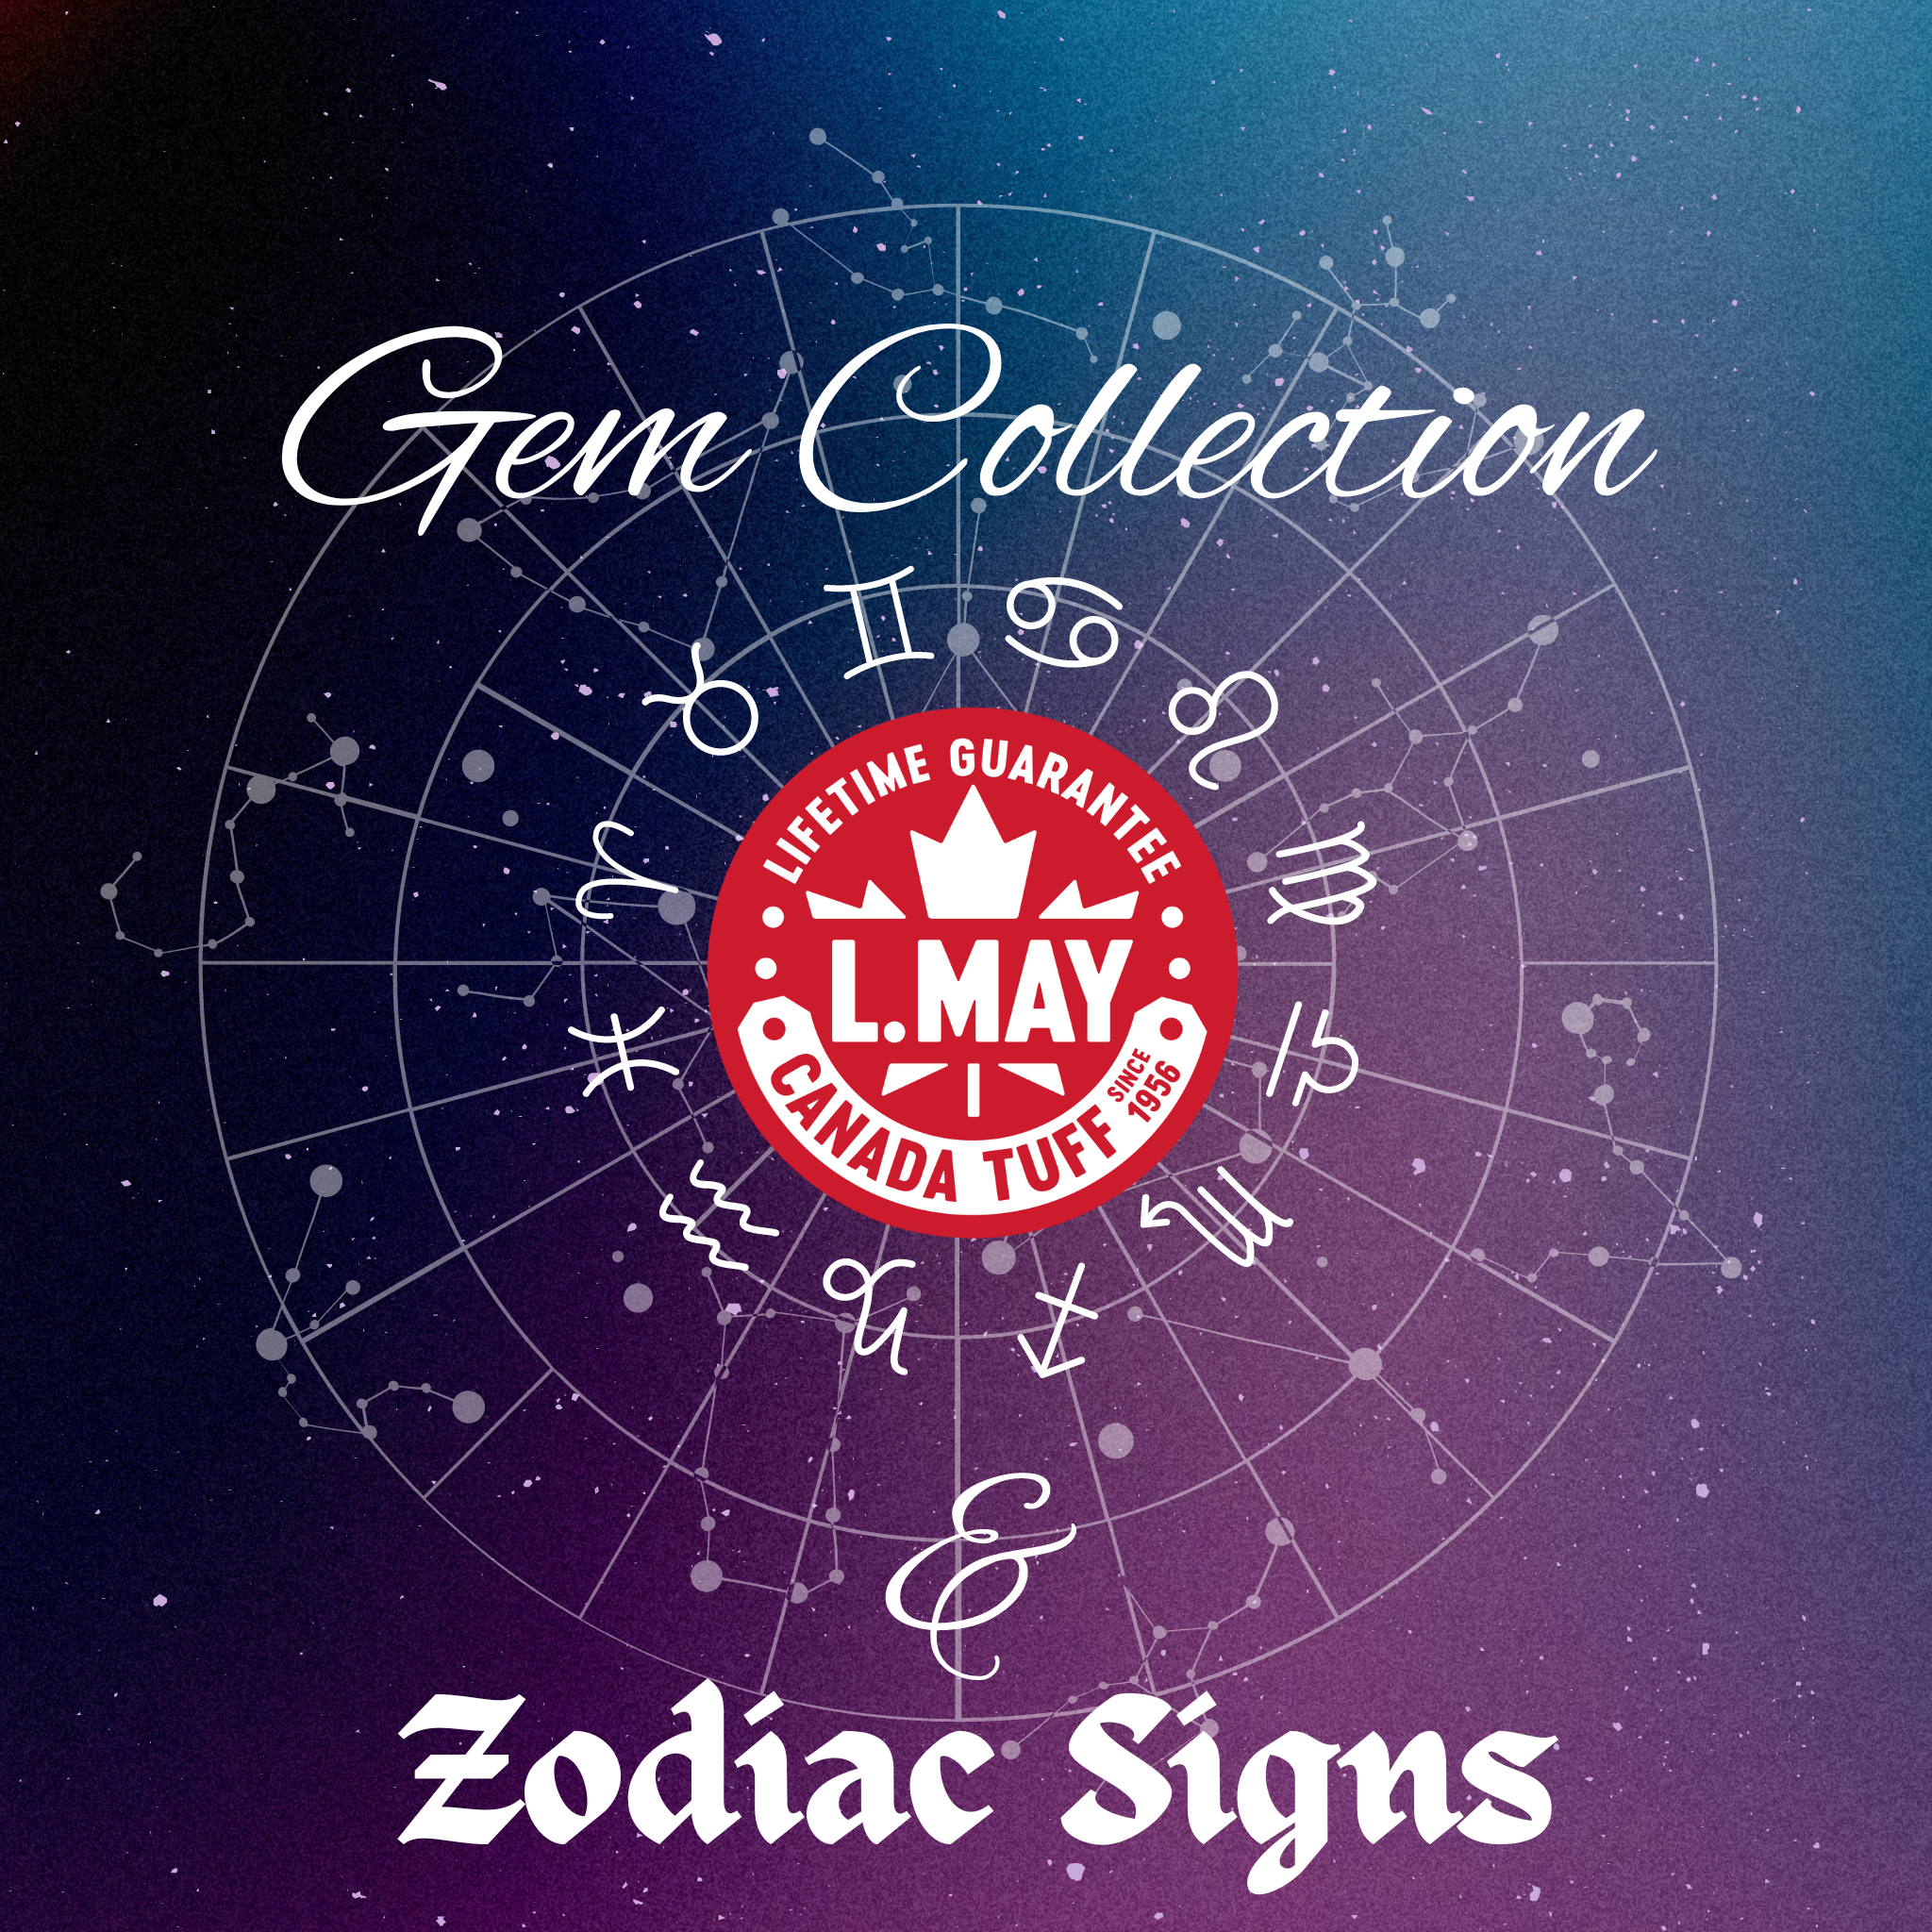 welcome banner for zodiac signs campaign for discounts on L. May lunchboxes